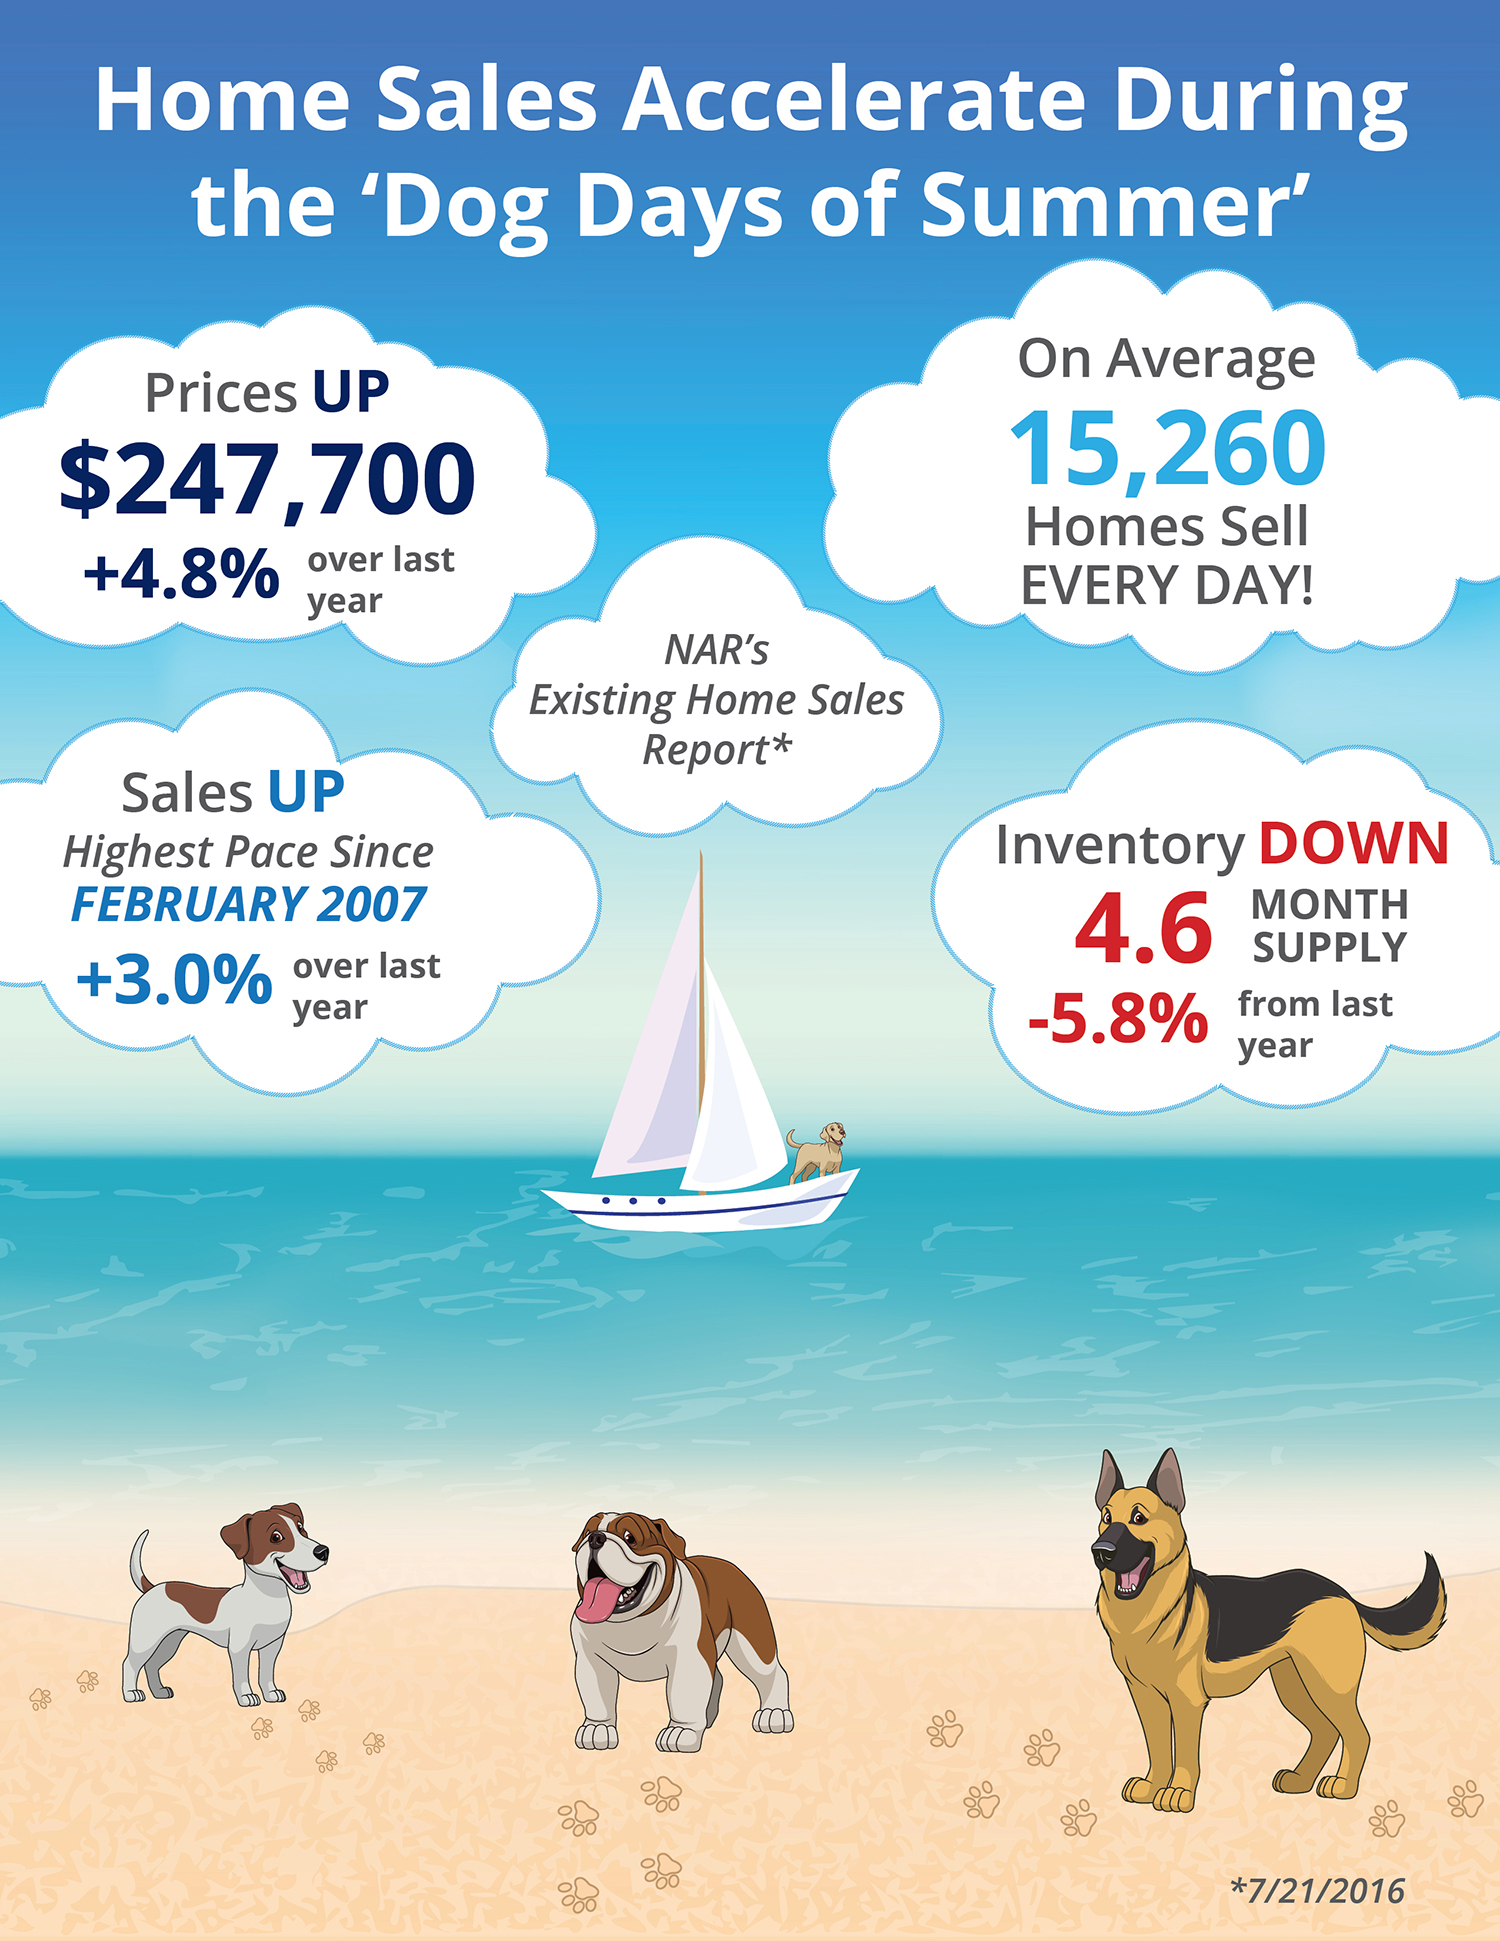 Home Sales Accelerate During The “Dog Days of Summer” [INFOGRAPHIC]